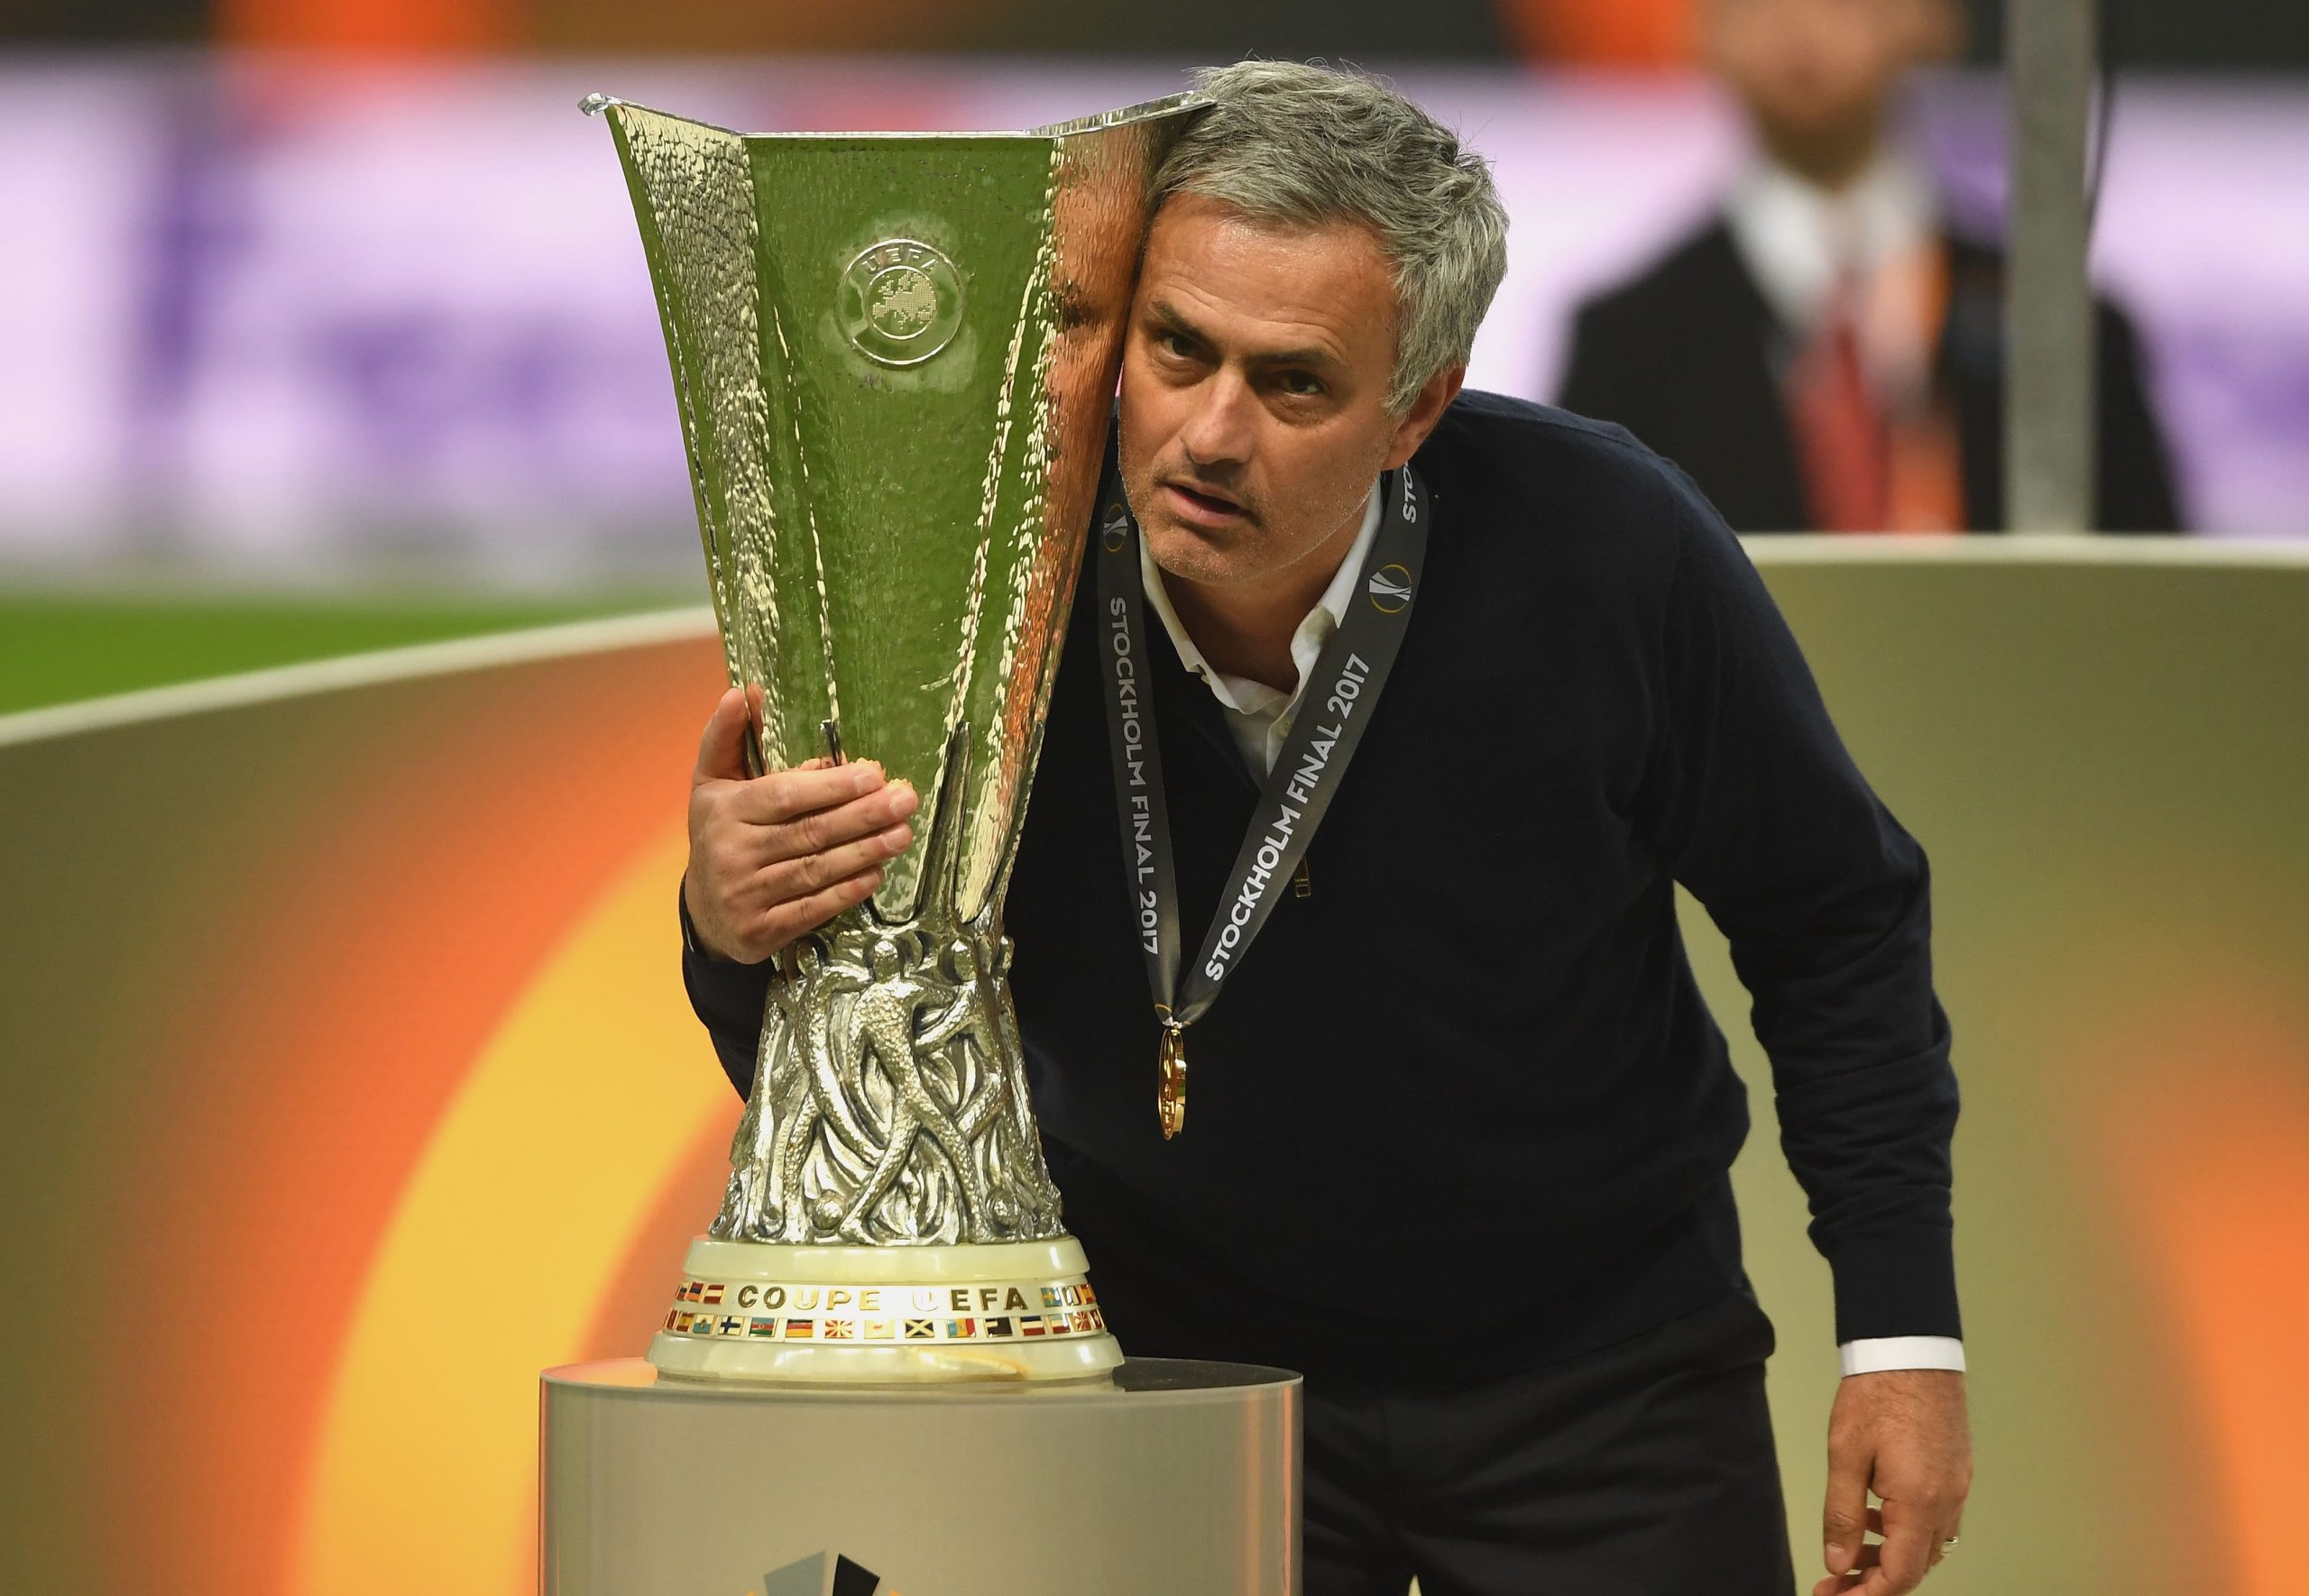 Jose Mourinho won the UEFA Europa League in 2017 with Manchester United. (GETTY Images)